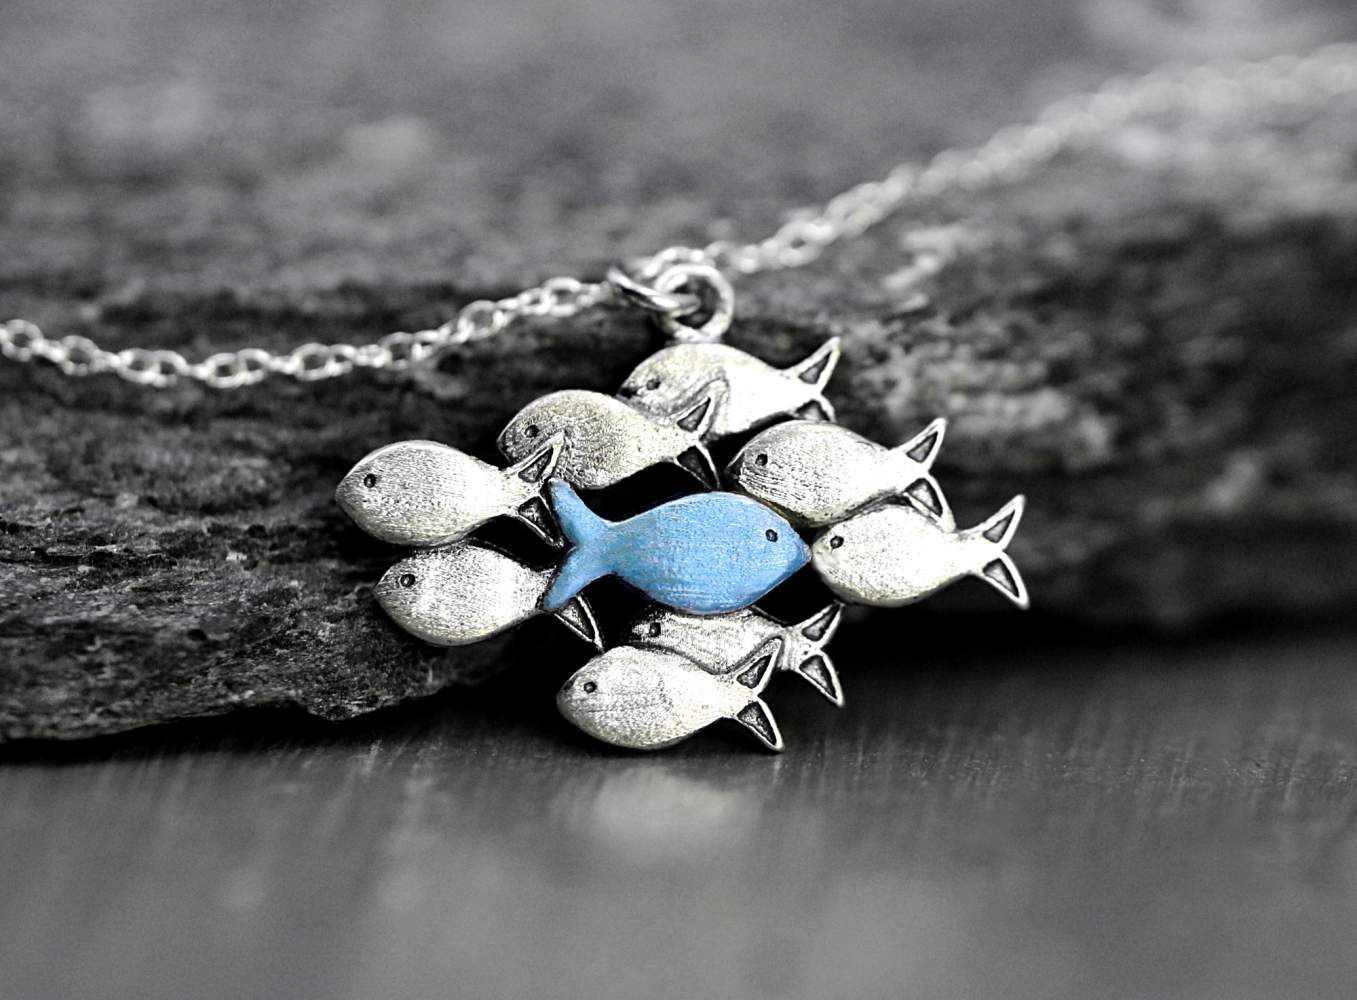 Silver necklace AGAINST THE CURRENT with blue fish